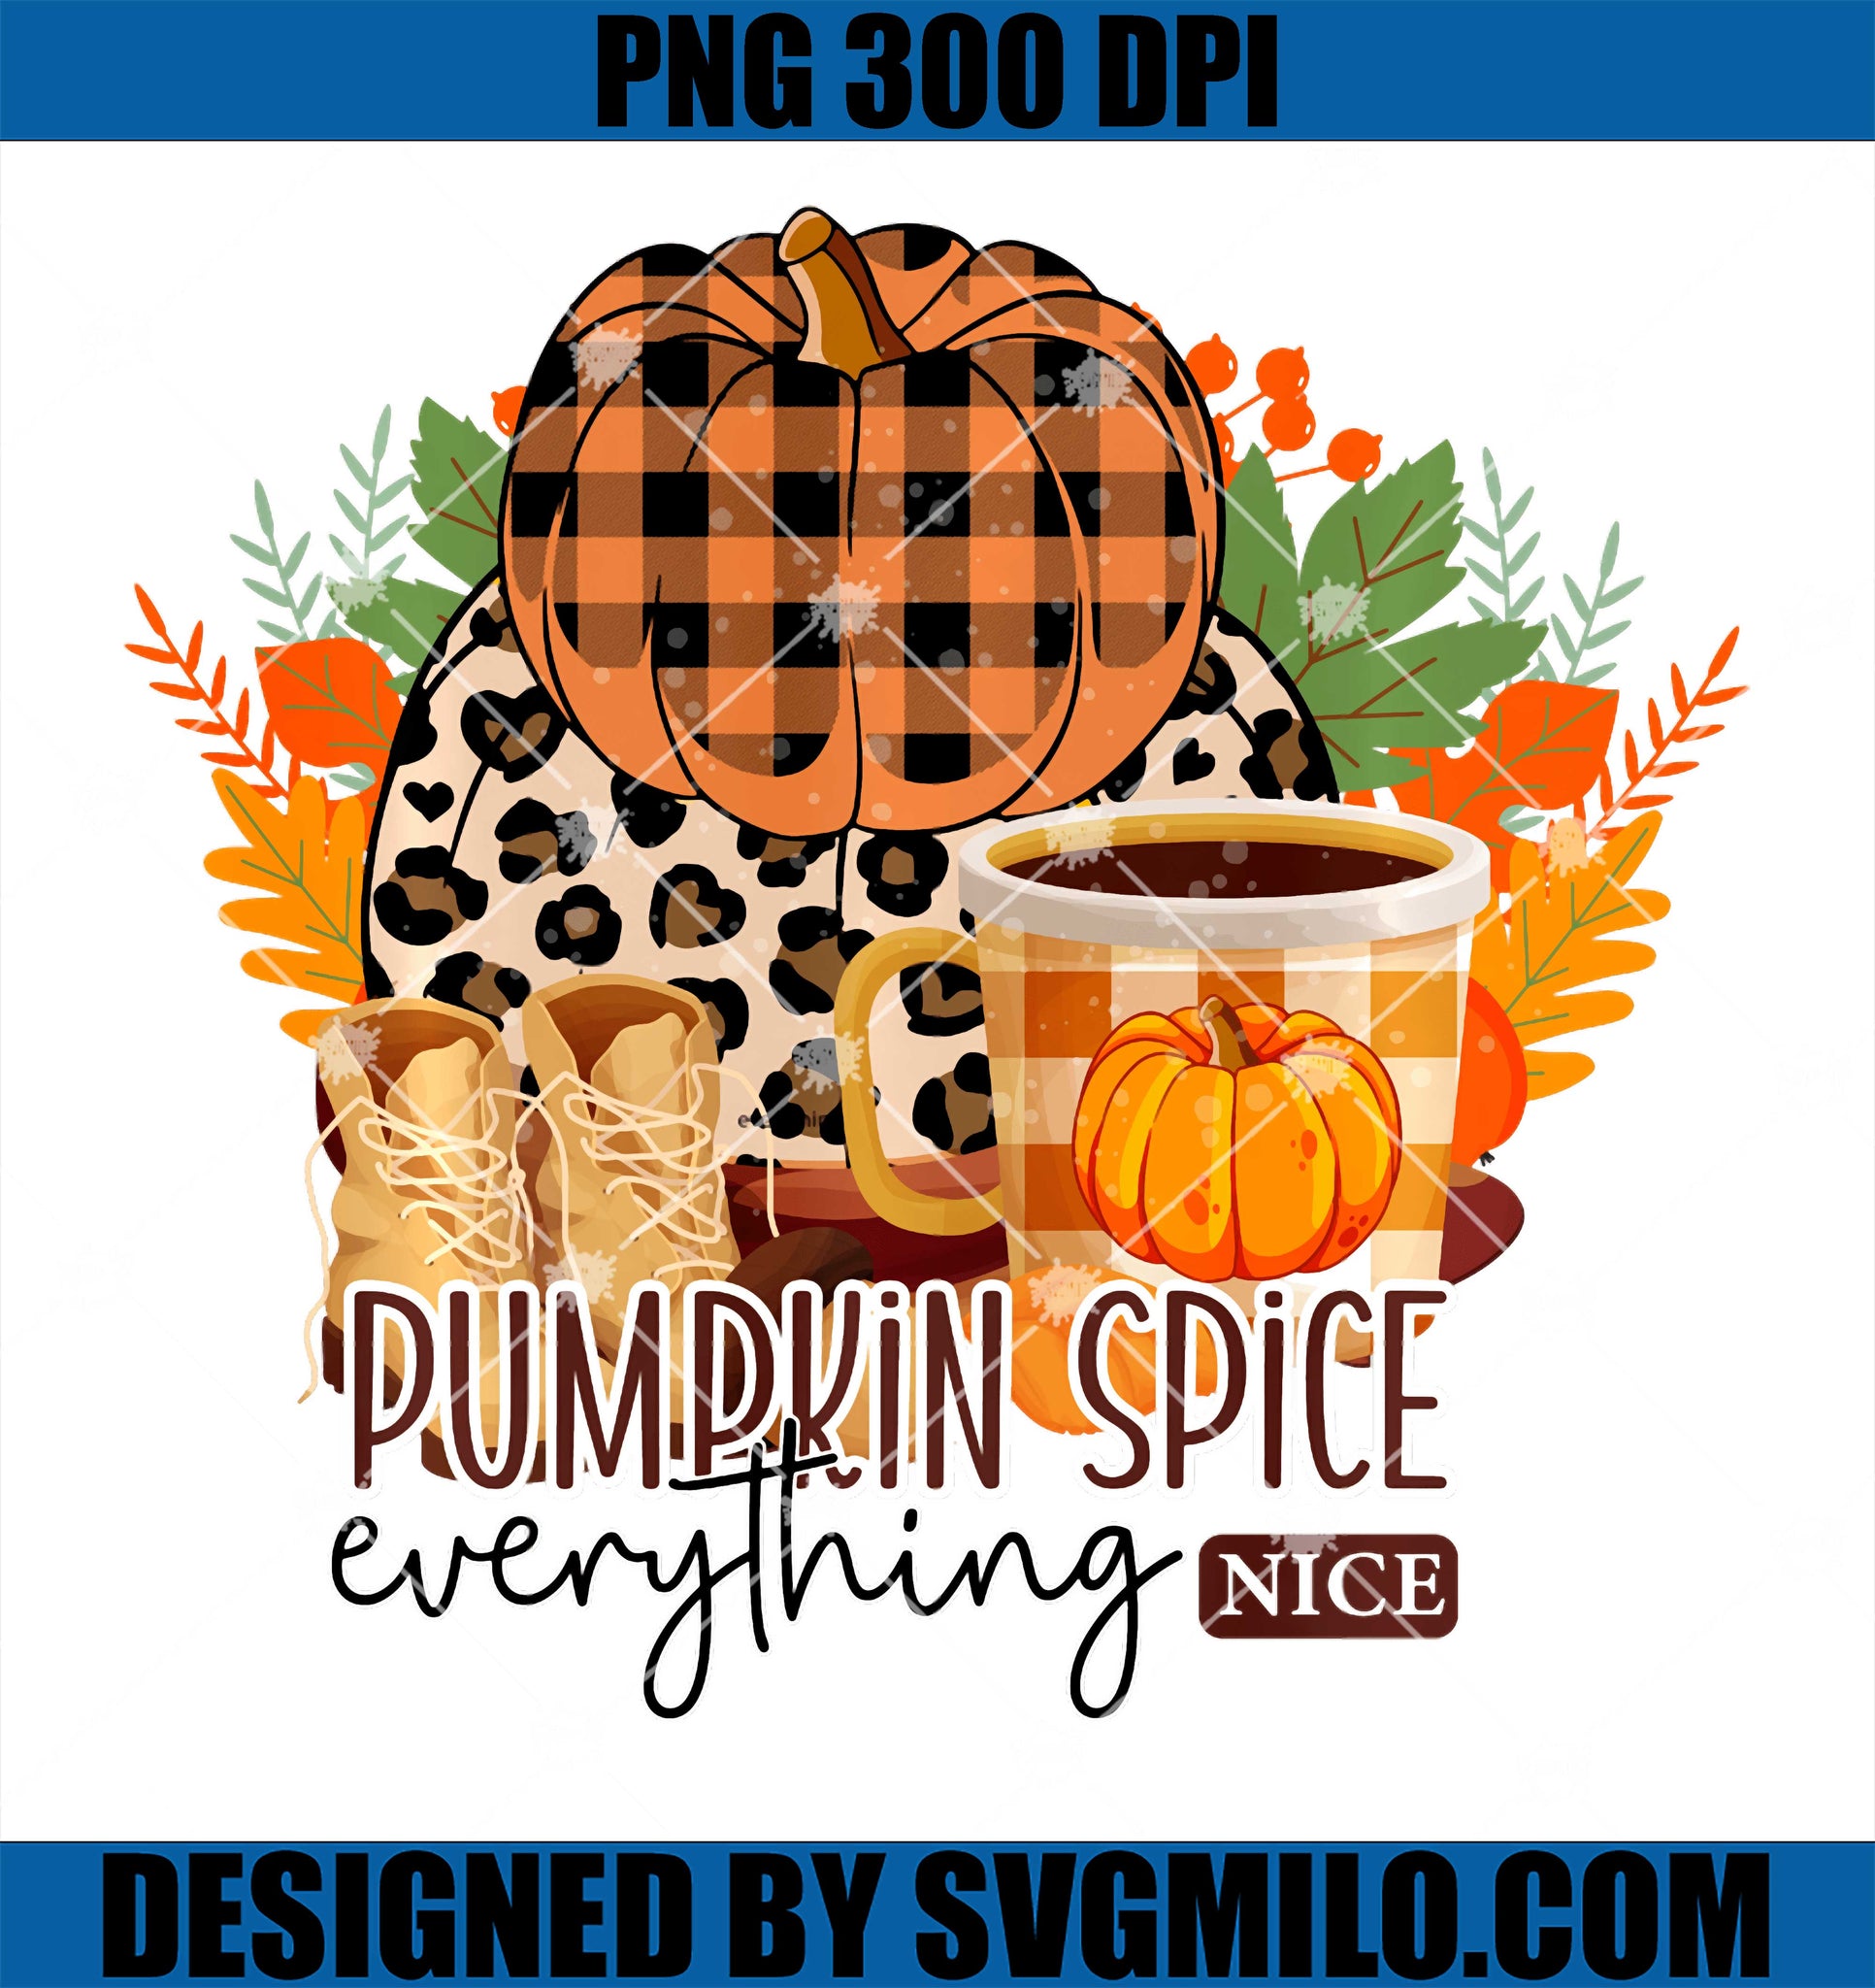 Pumpkin Spice and Everything Nice PNG, Leopard Plaid Fall Season PNG